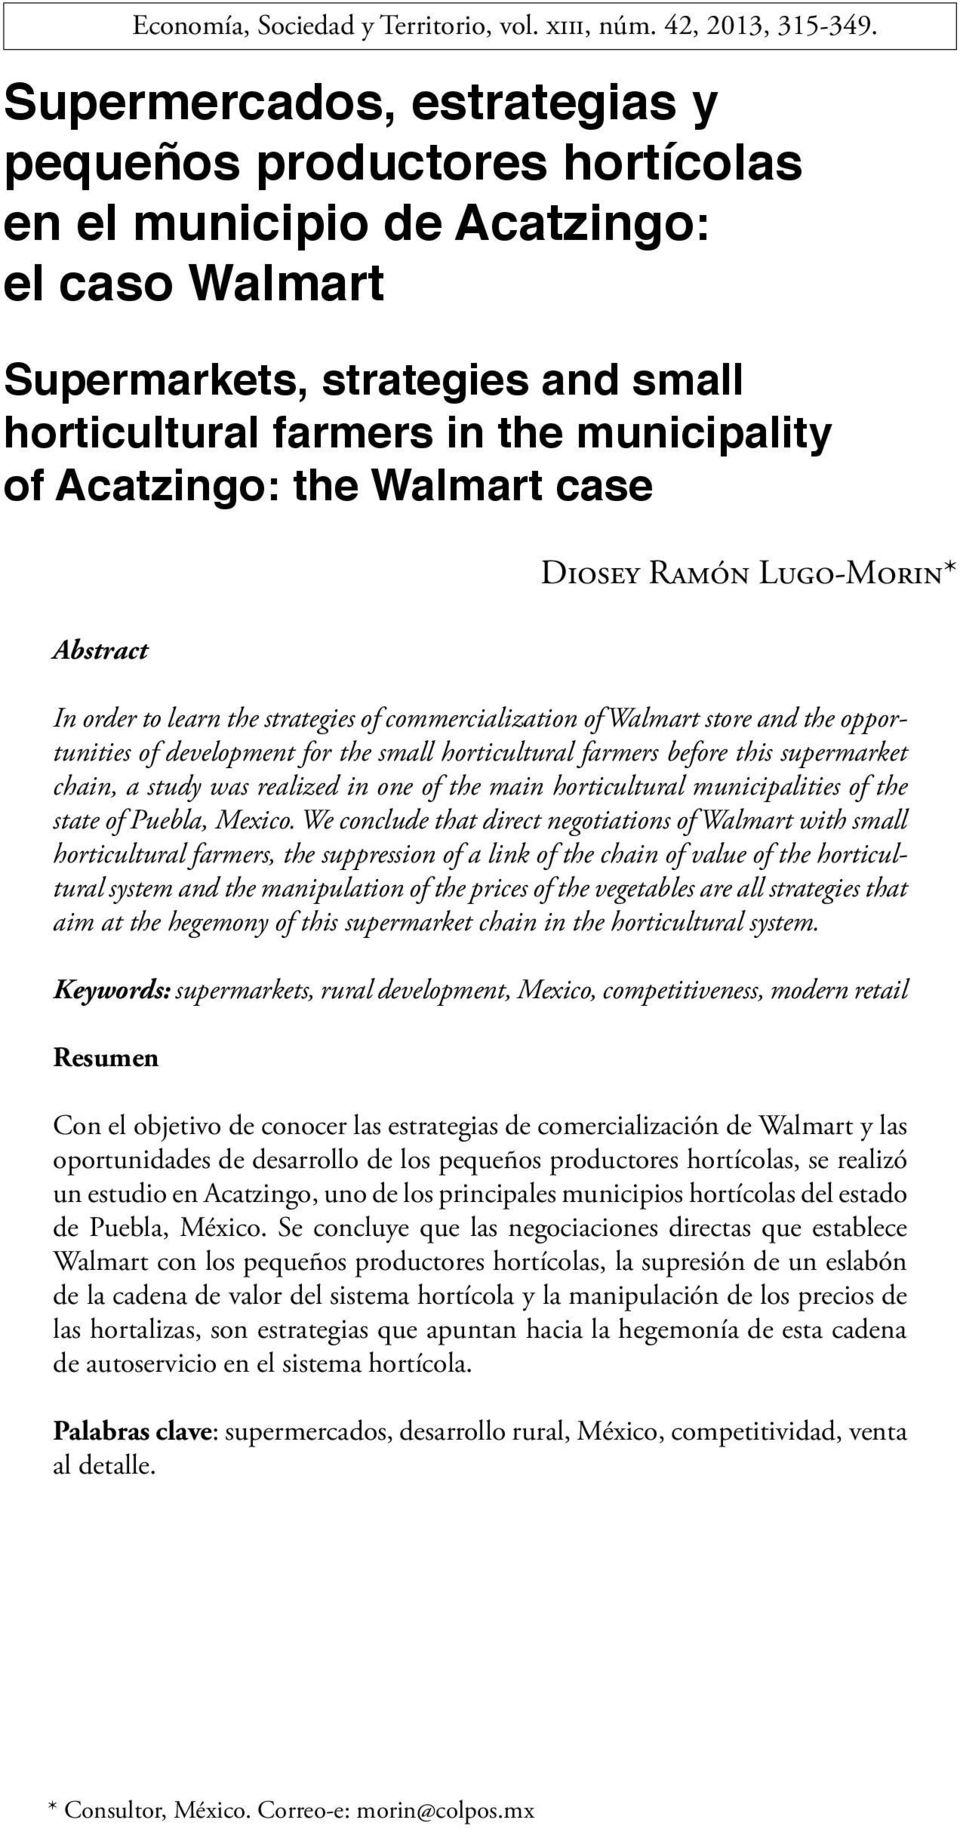 Acatzingo: the Walmart case Abstract Diosey Ramón Lugo-Morin* In order to learn the strategies of commercialization of Walmart store and the opportunities of development for the small horticultural